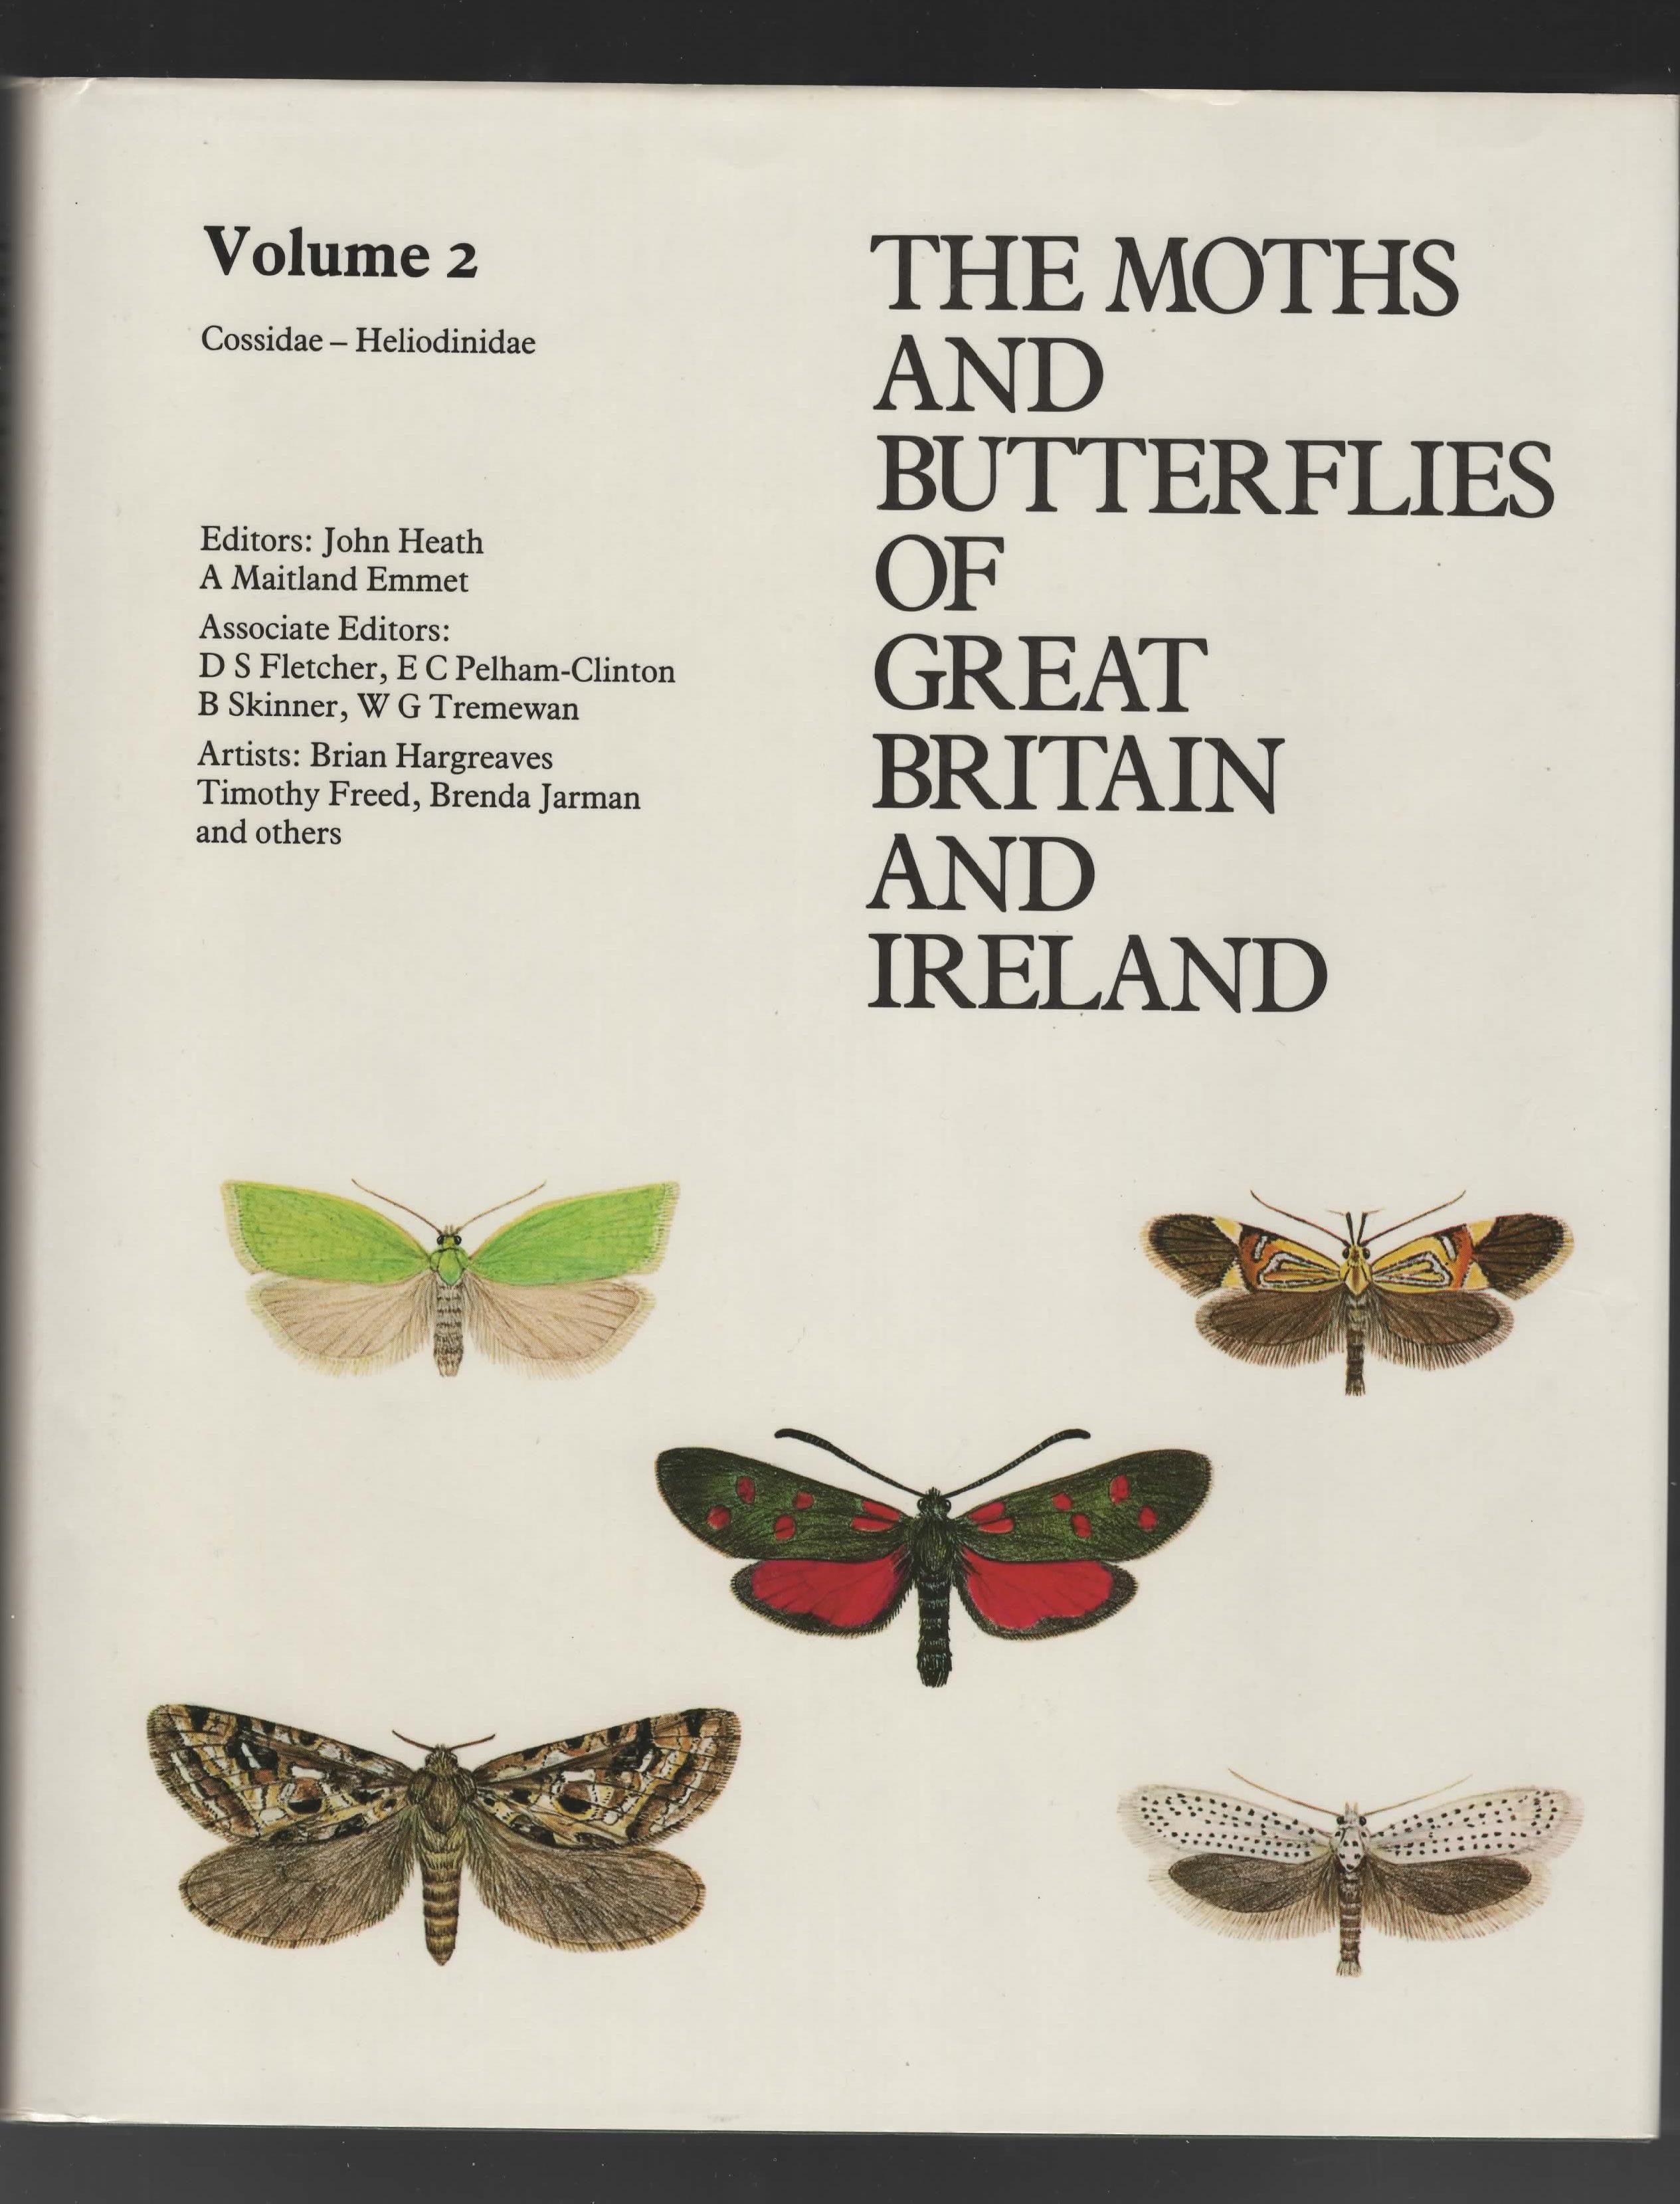 The Butterflies and Moths of Great Britain and Ireland: volume 2: Cossidae-Heliodinidae - Heath, J et al (eds)